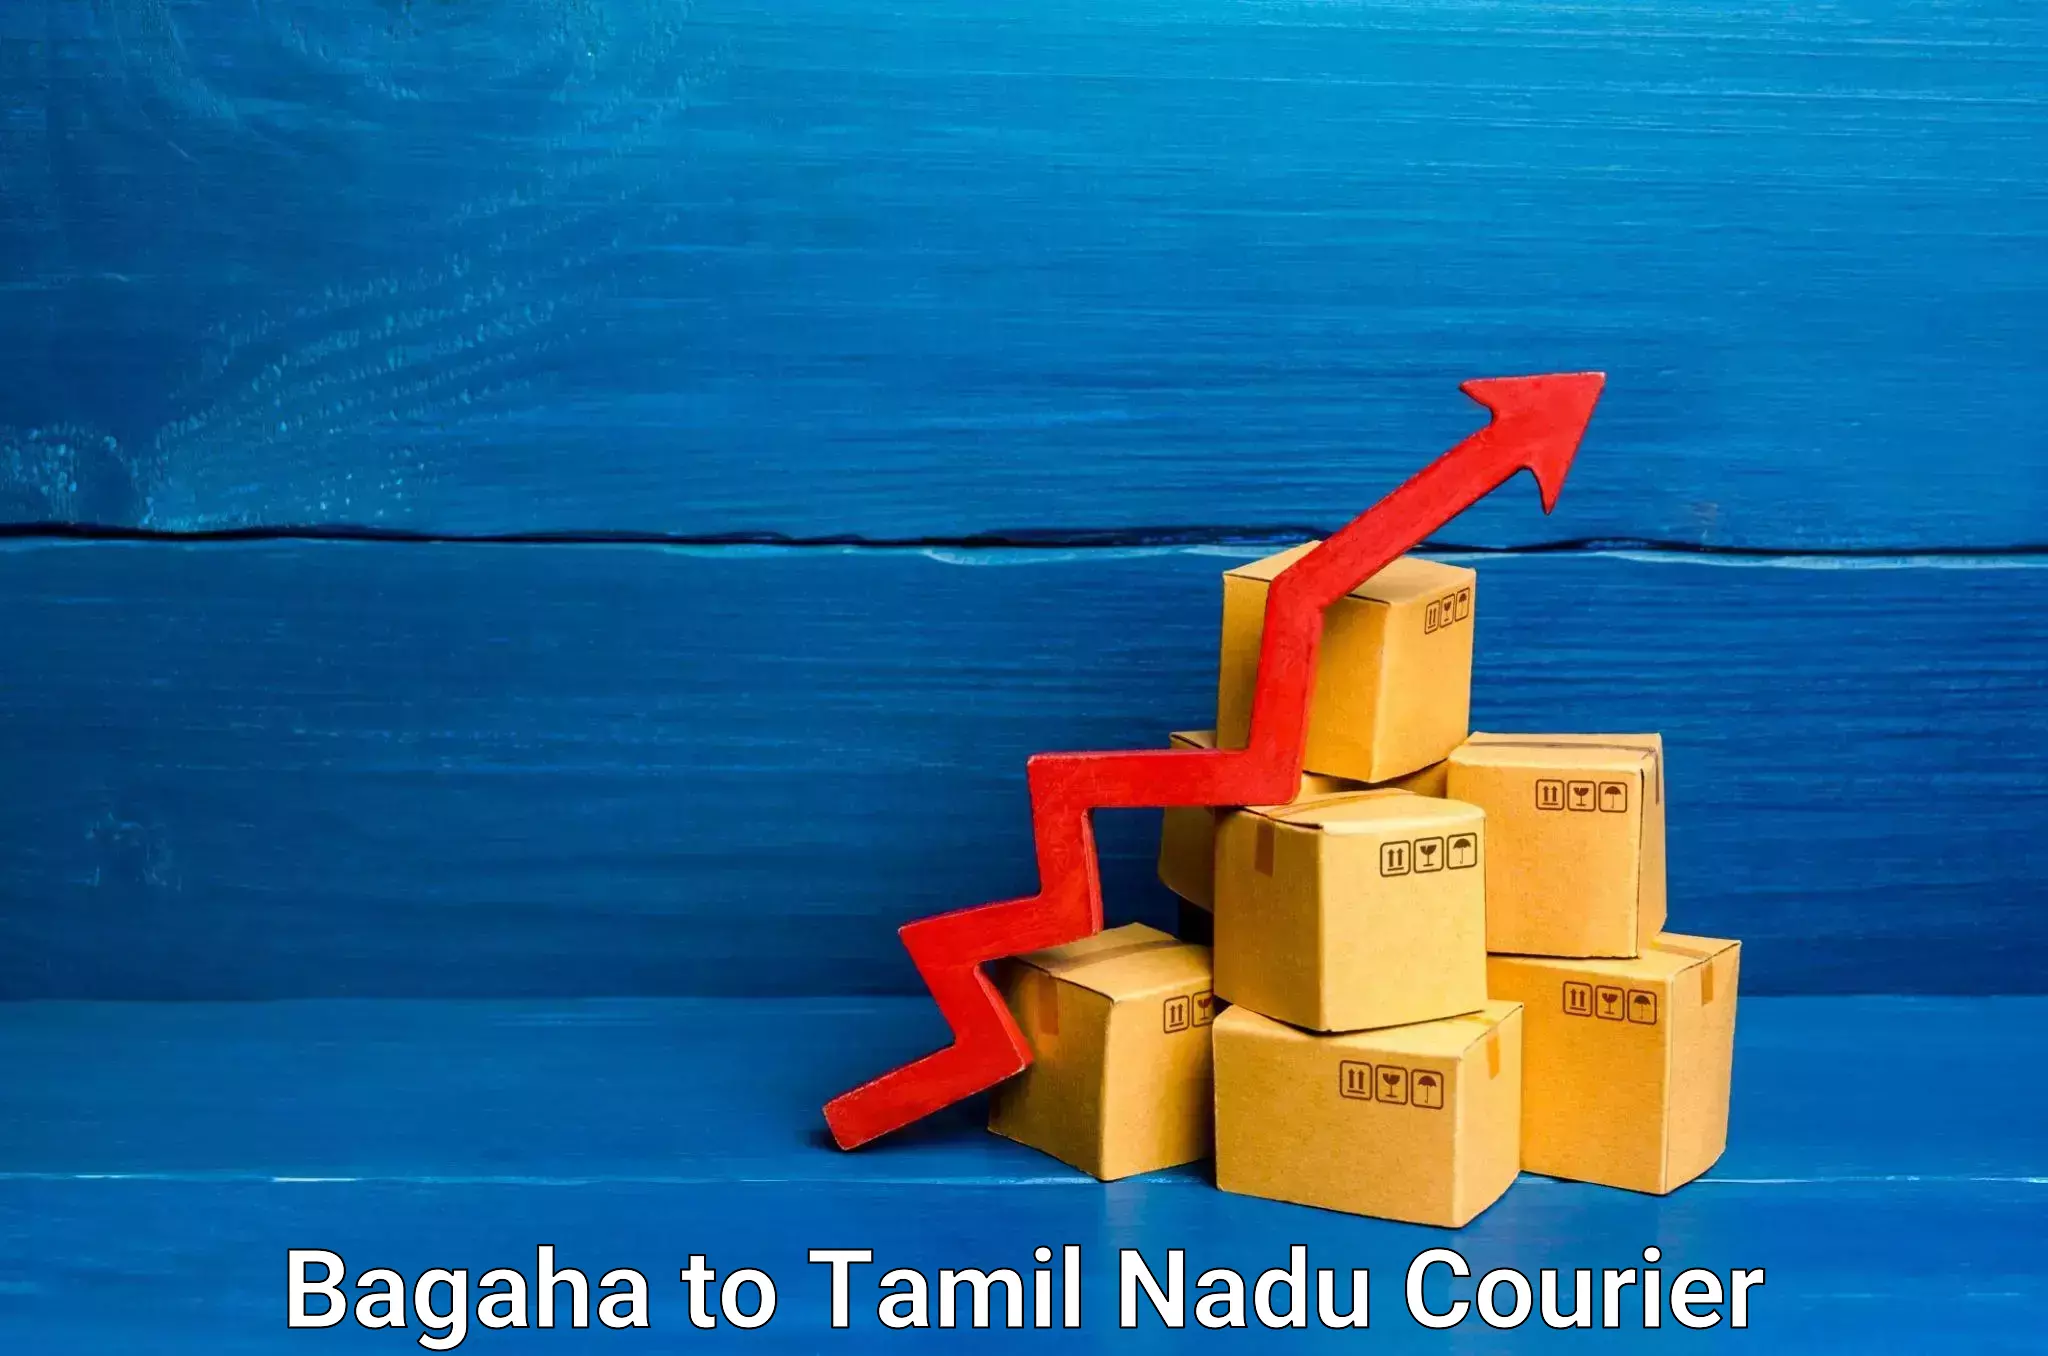 Reliable goods transport Bagaha to Ennore Port Chennai